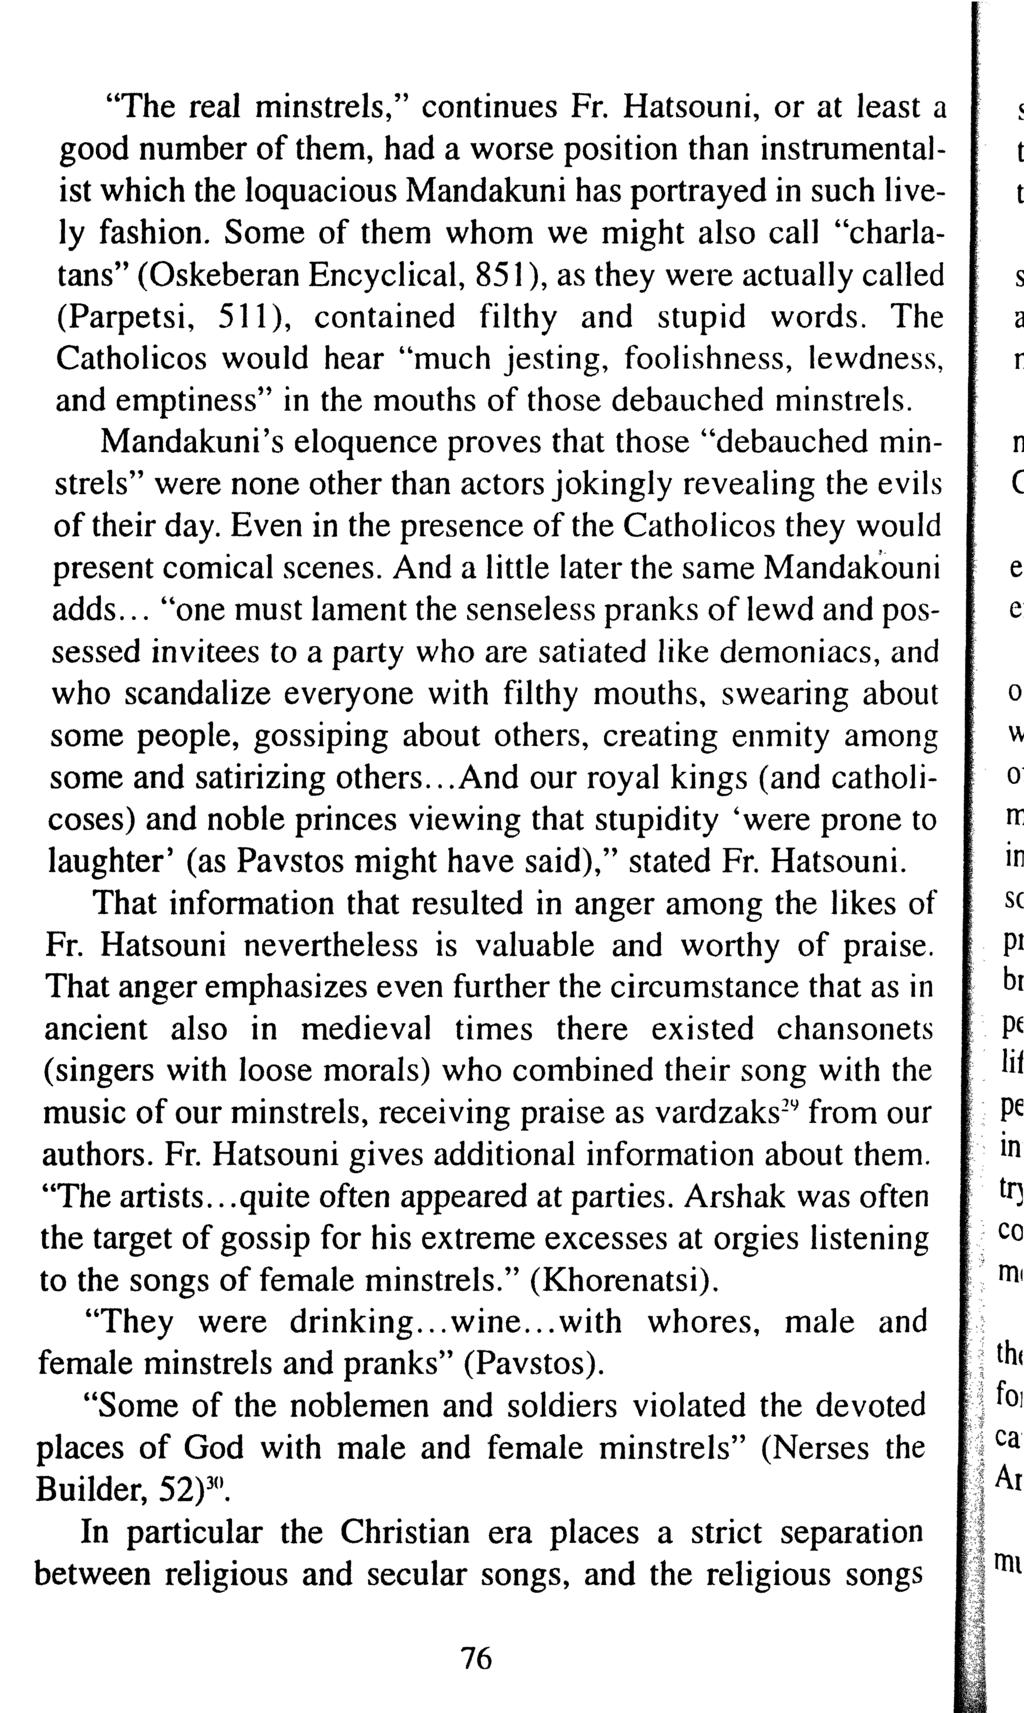 "The real minstrels," continues Fr. Hatsouni, or at least a good number of them, had a worse position than instrumental- t ist which the loquacious Mandakuni has portrayed in such live- t ly fashion.